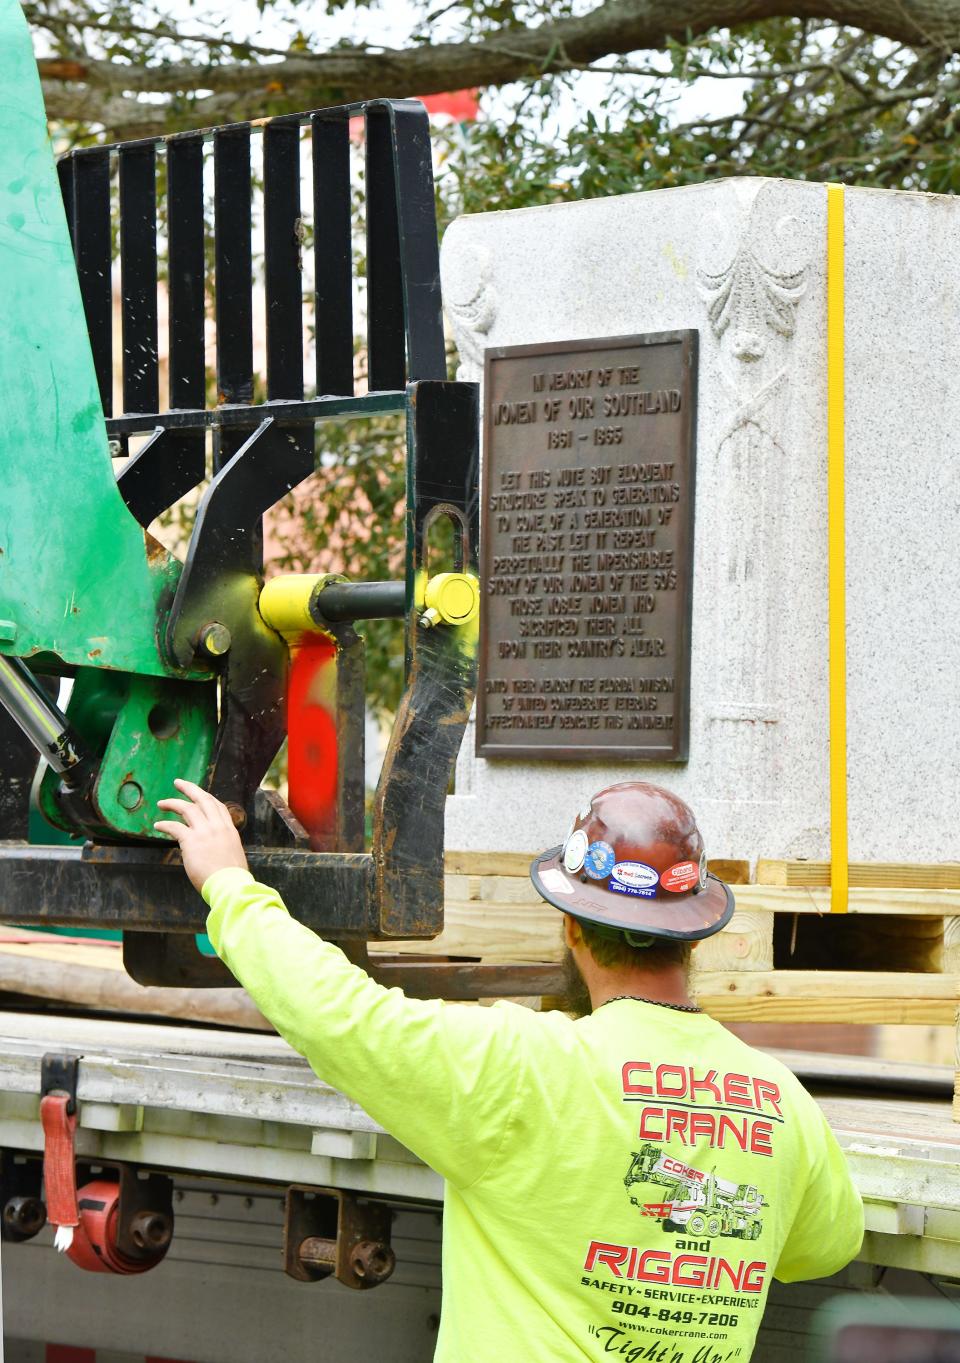 The pedestal and commemorative plaque that held the bronze statue of a women reading to two children is moved to the bed of a flatbed truck after being removed from the "Women of the Southland" monument on Dec. 27.